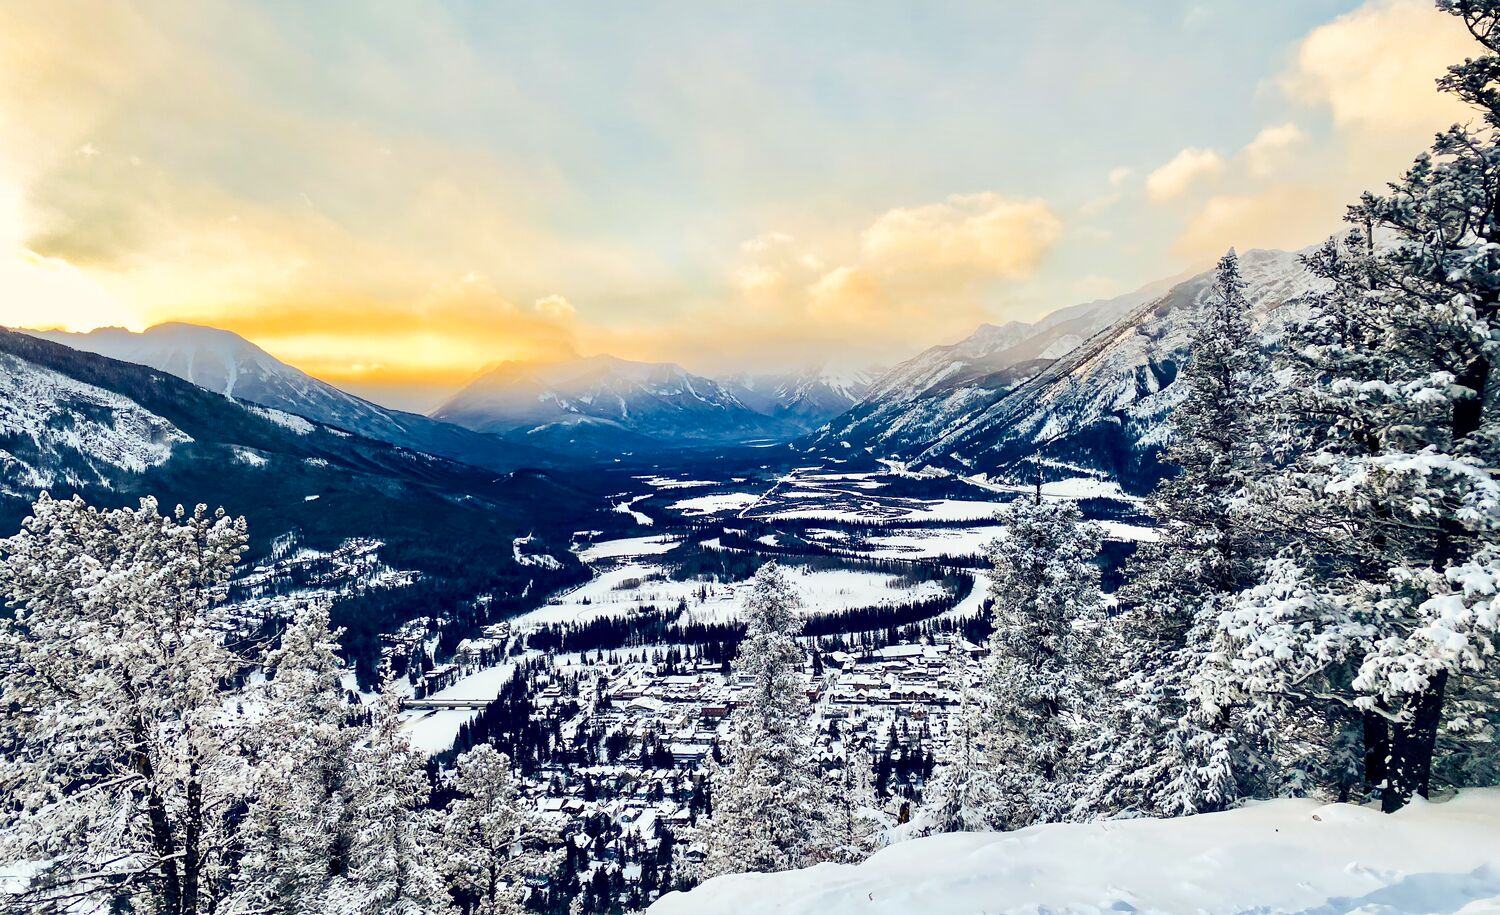 The Banff Townsite stretches out below Tunnel Mountain as seen from the summit of the short day hike in Banff National Park.